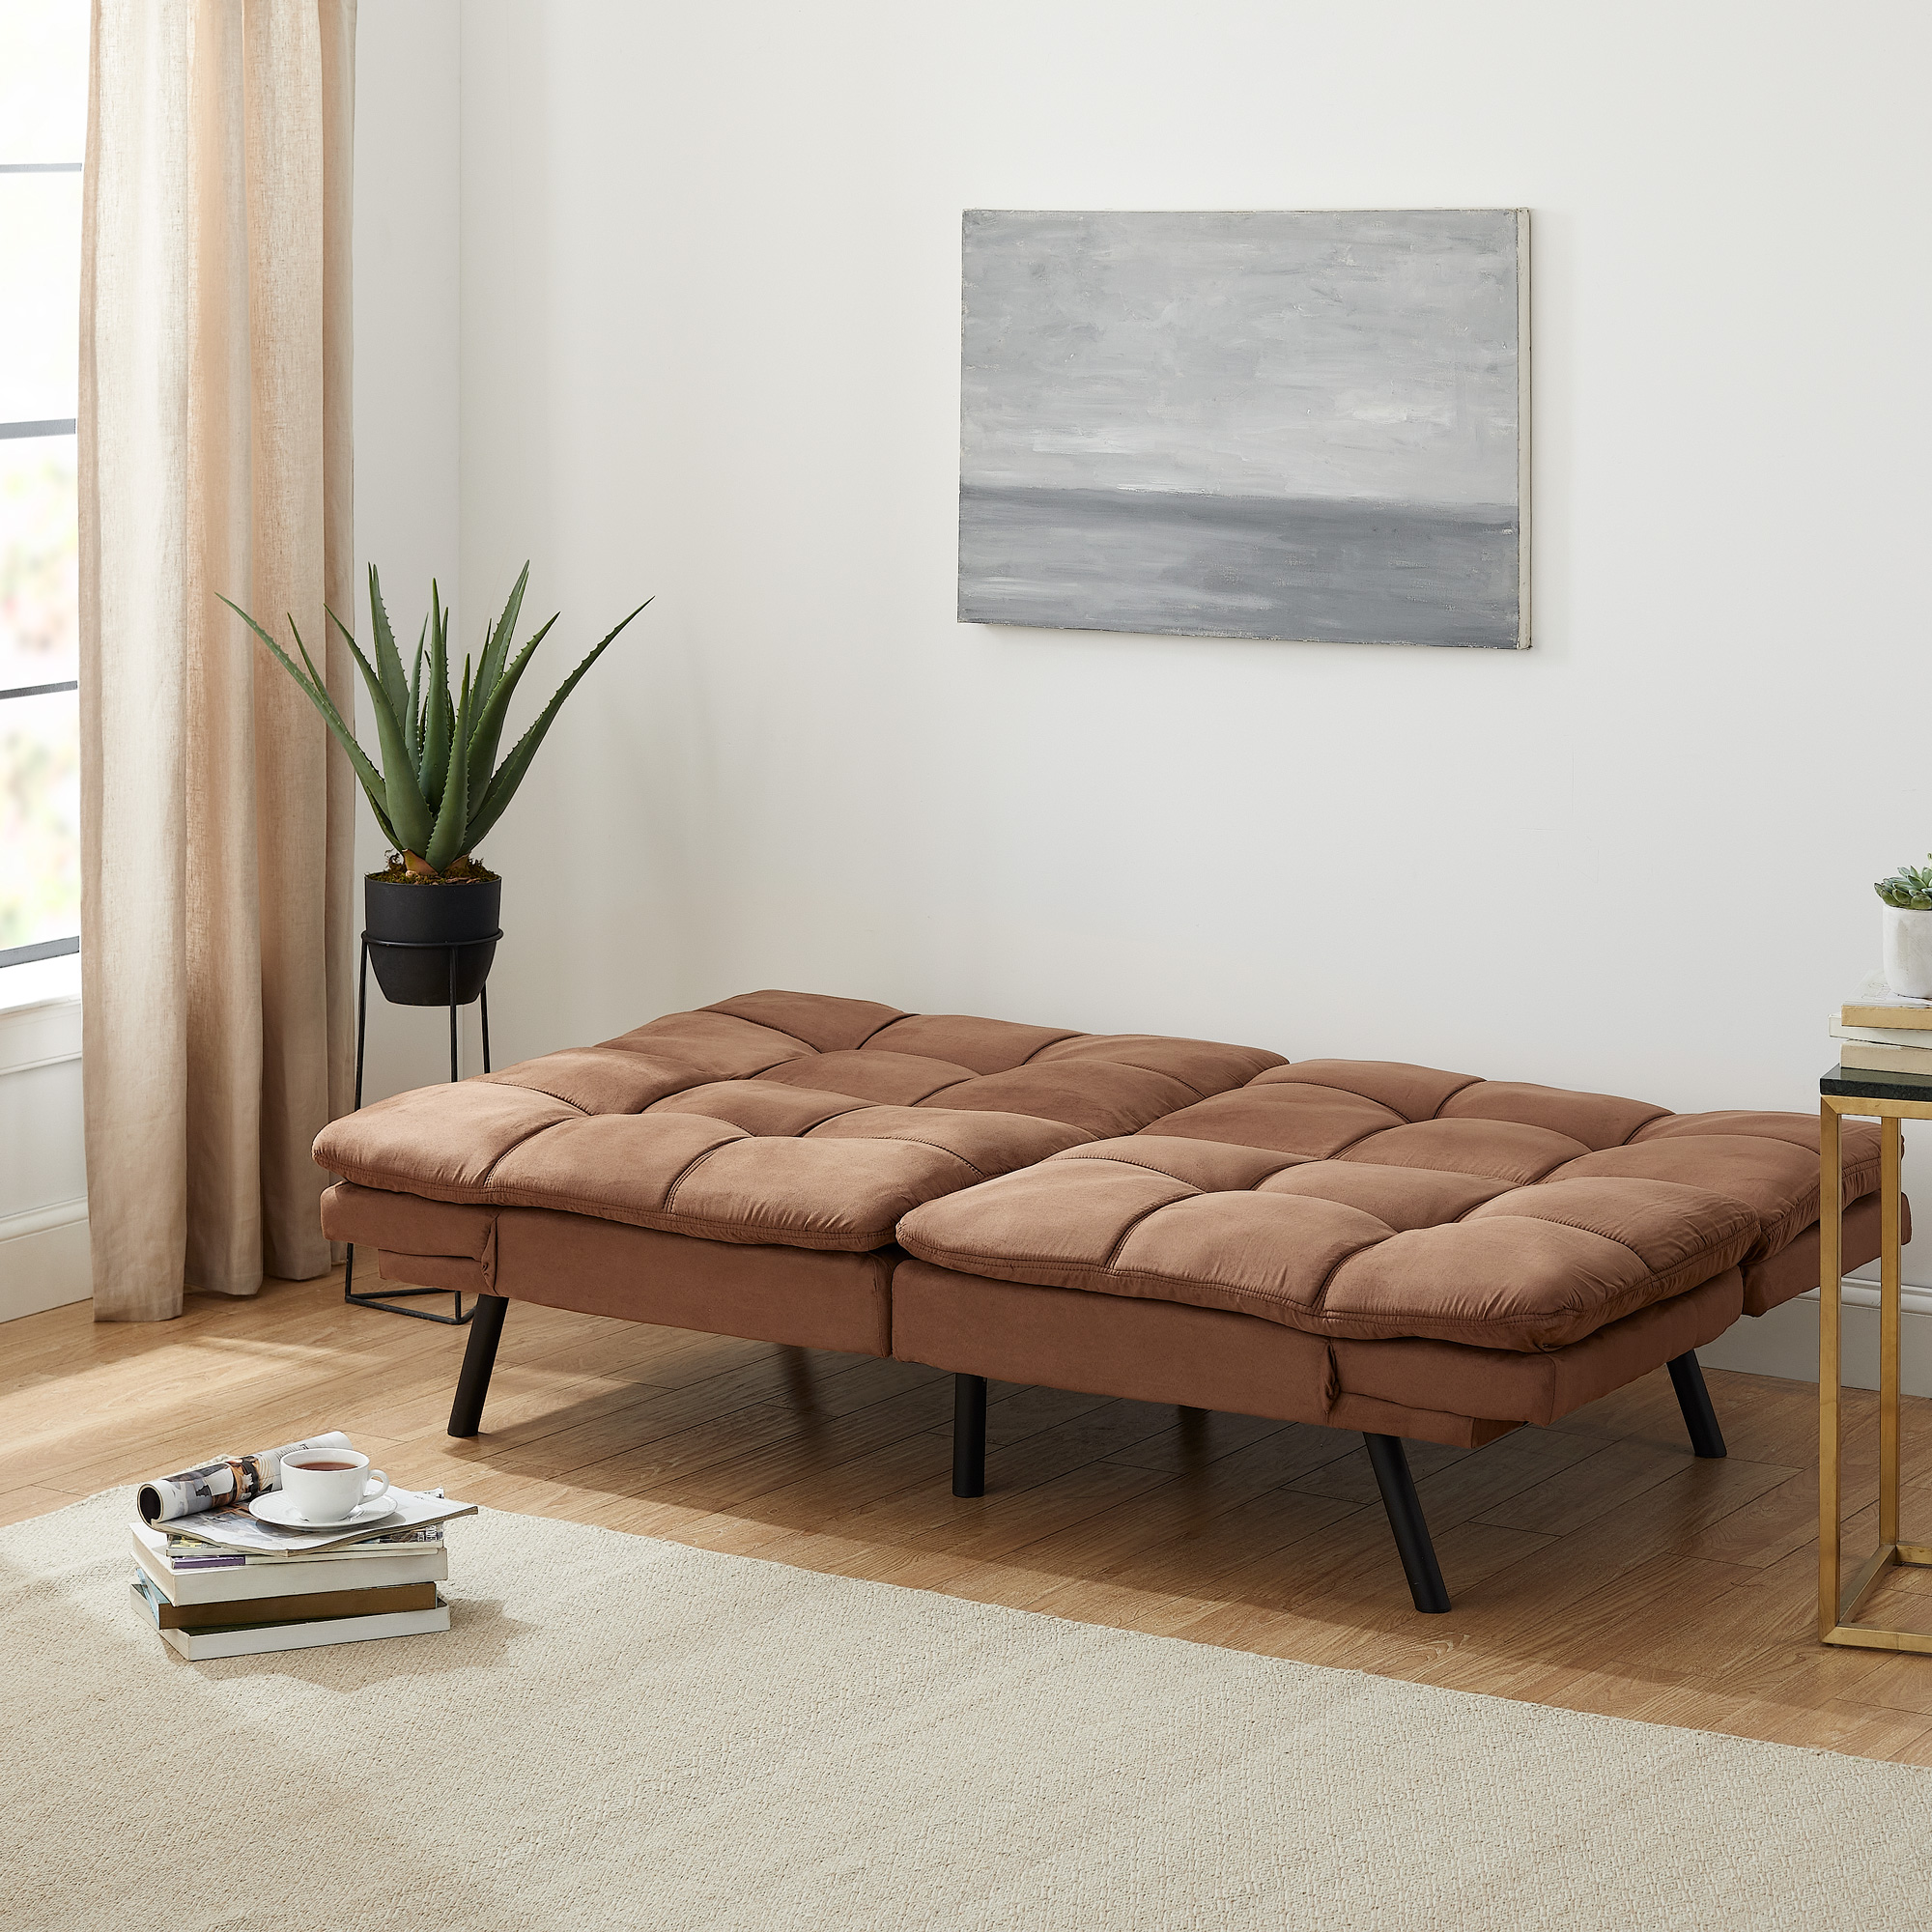 Mainstays Memory Foam Futon with Adjustable Armrests , Camel Faux Suede Fabric for Adults - image 7 of 9